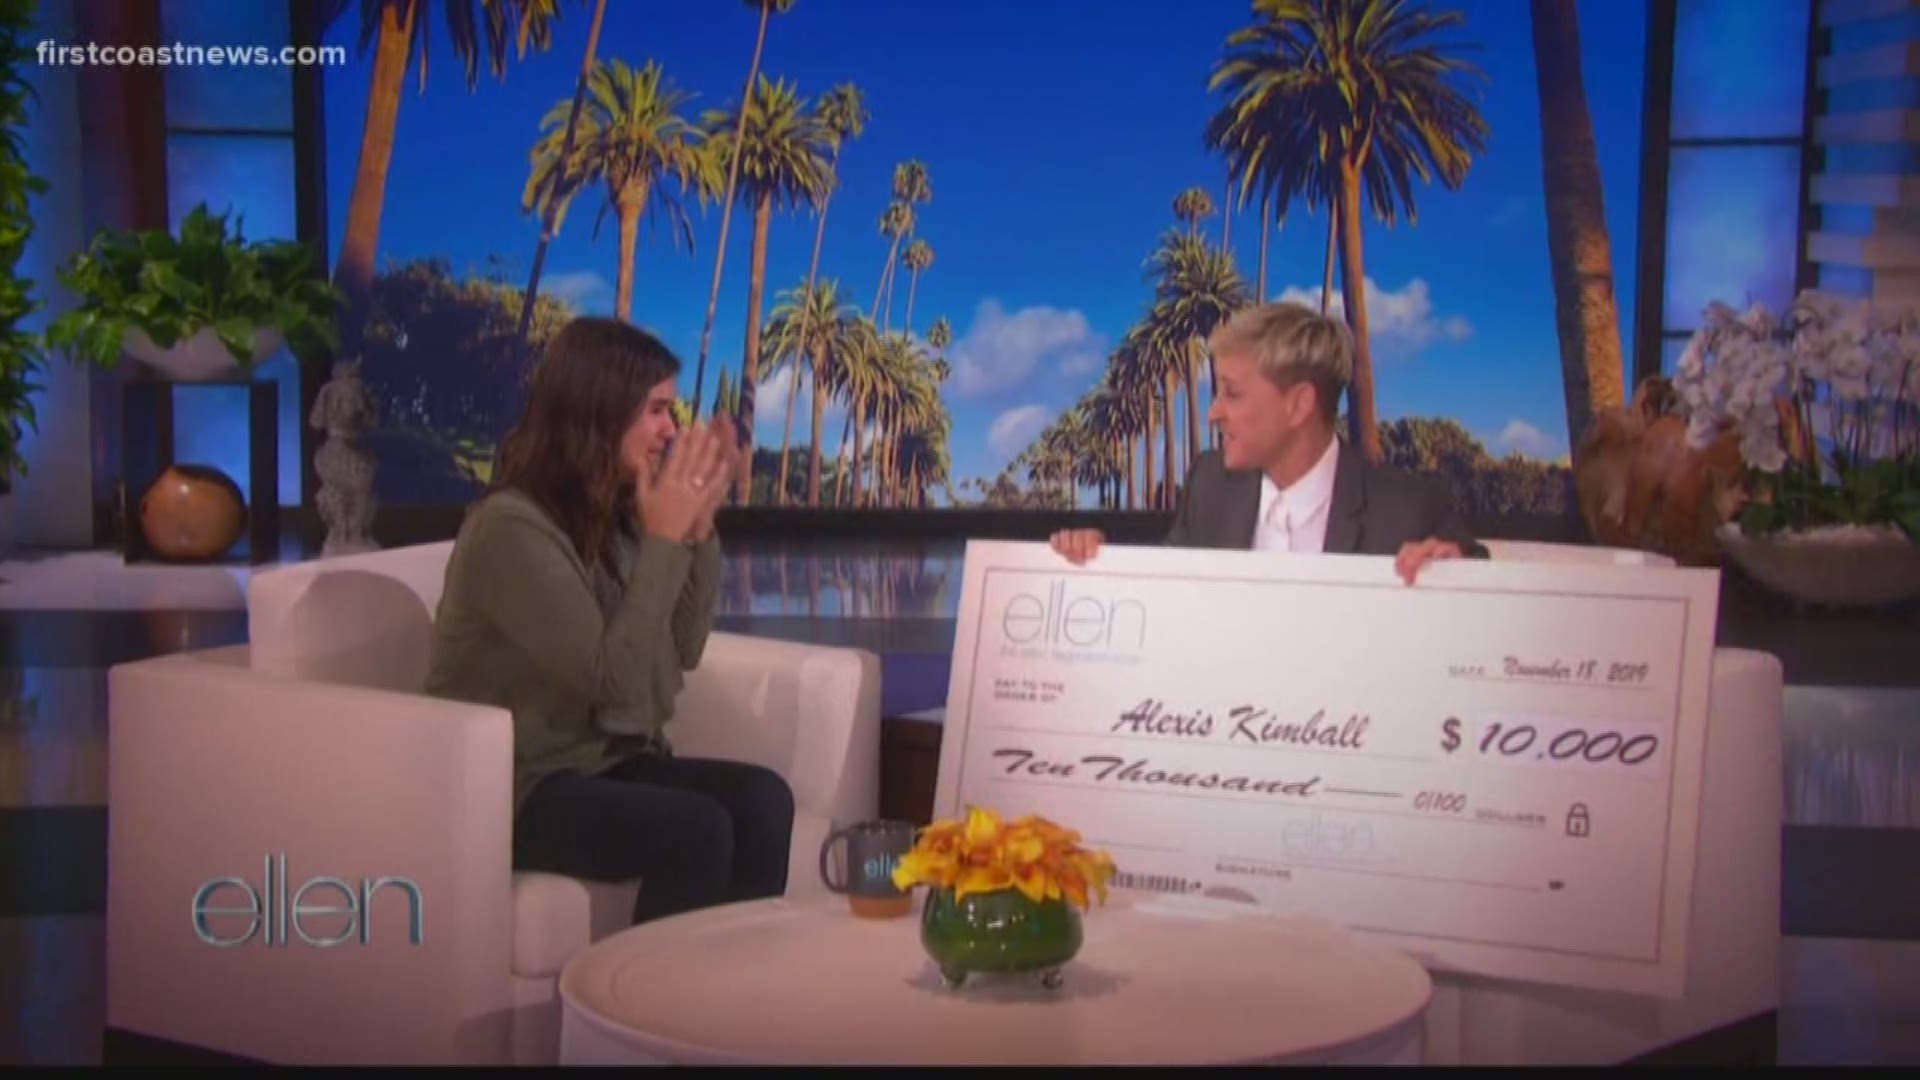 Ellen DeGeneres was so touched by a Jacksonville woman's dream of founding an animal hospital that she fixed one her games to allow the woman to win $10,000.